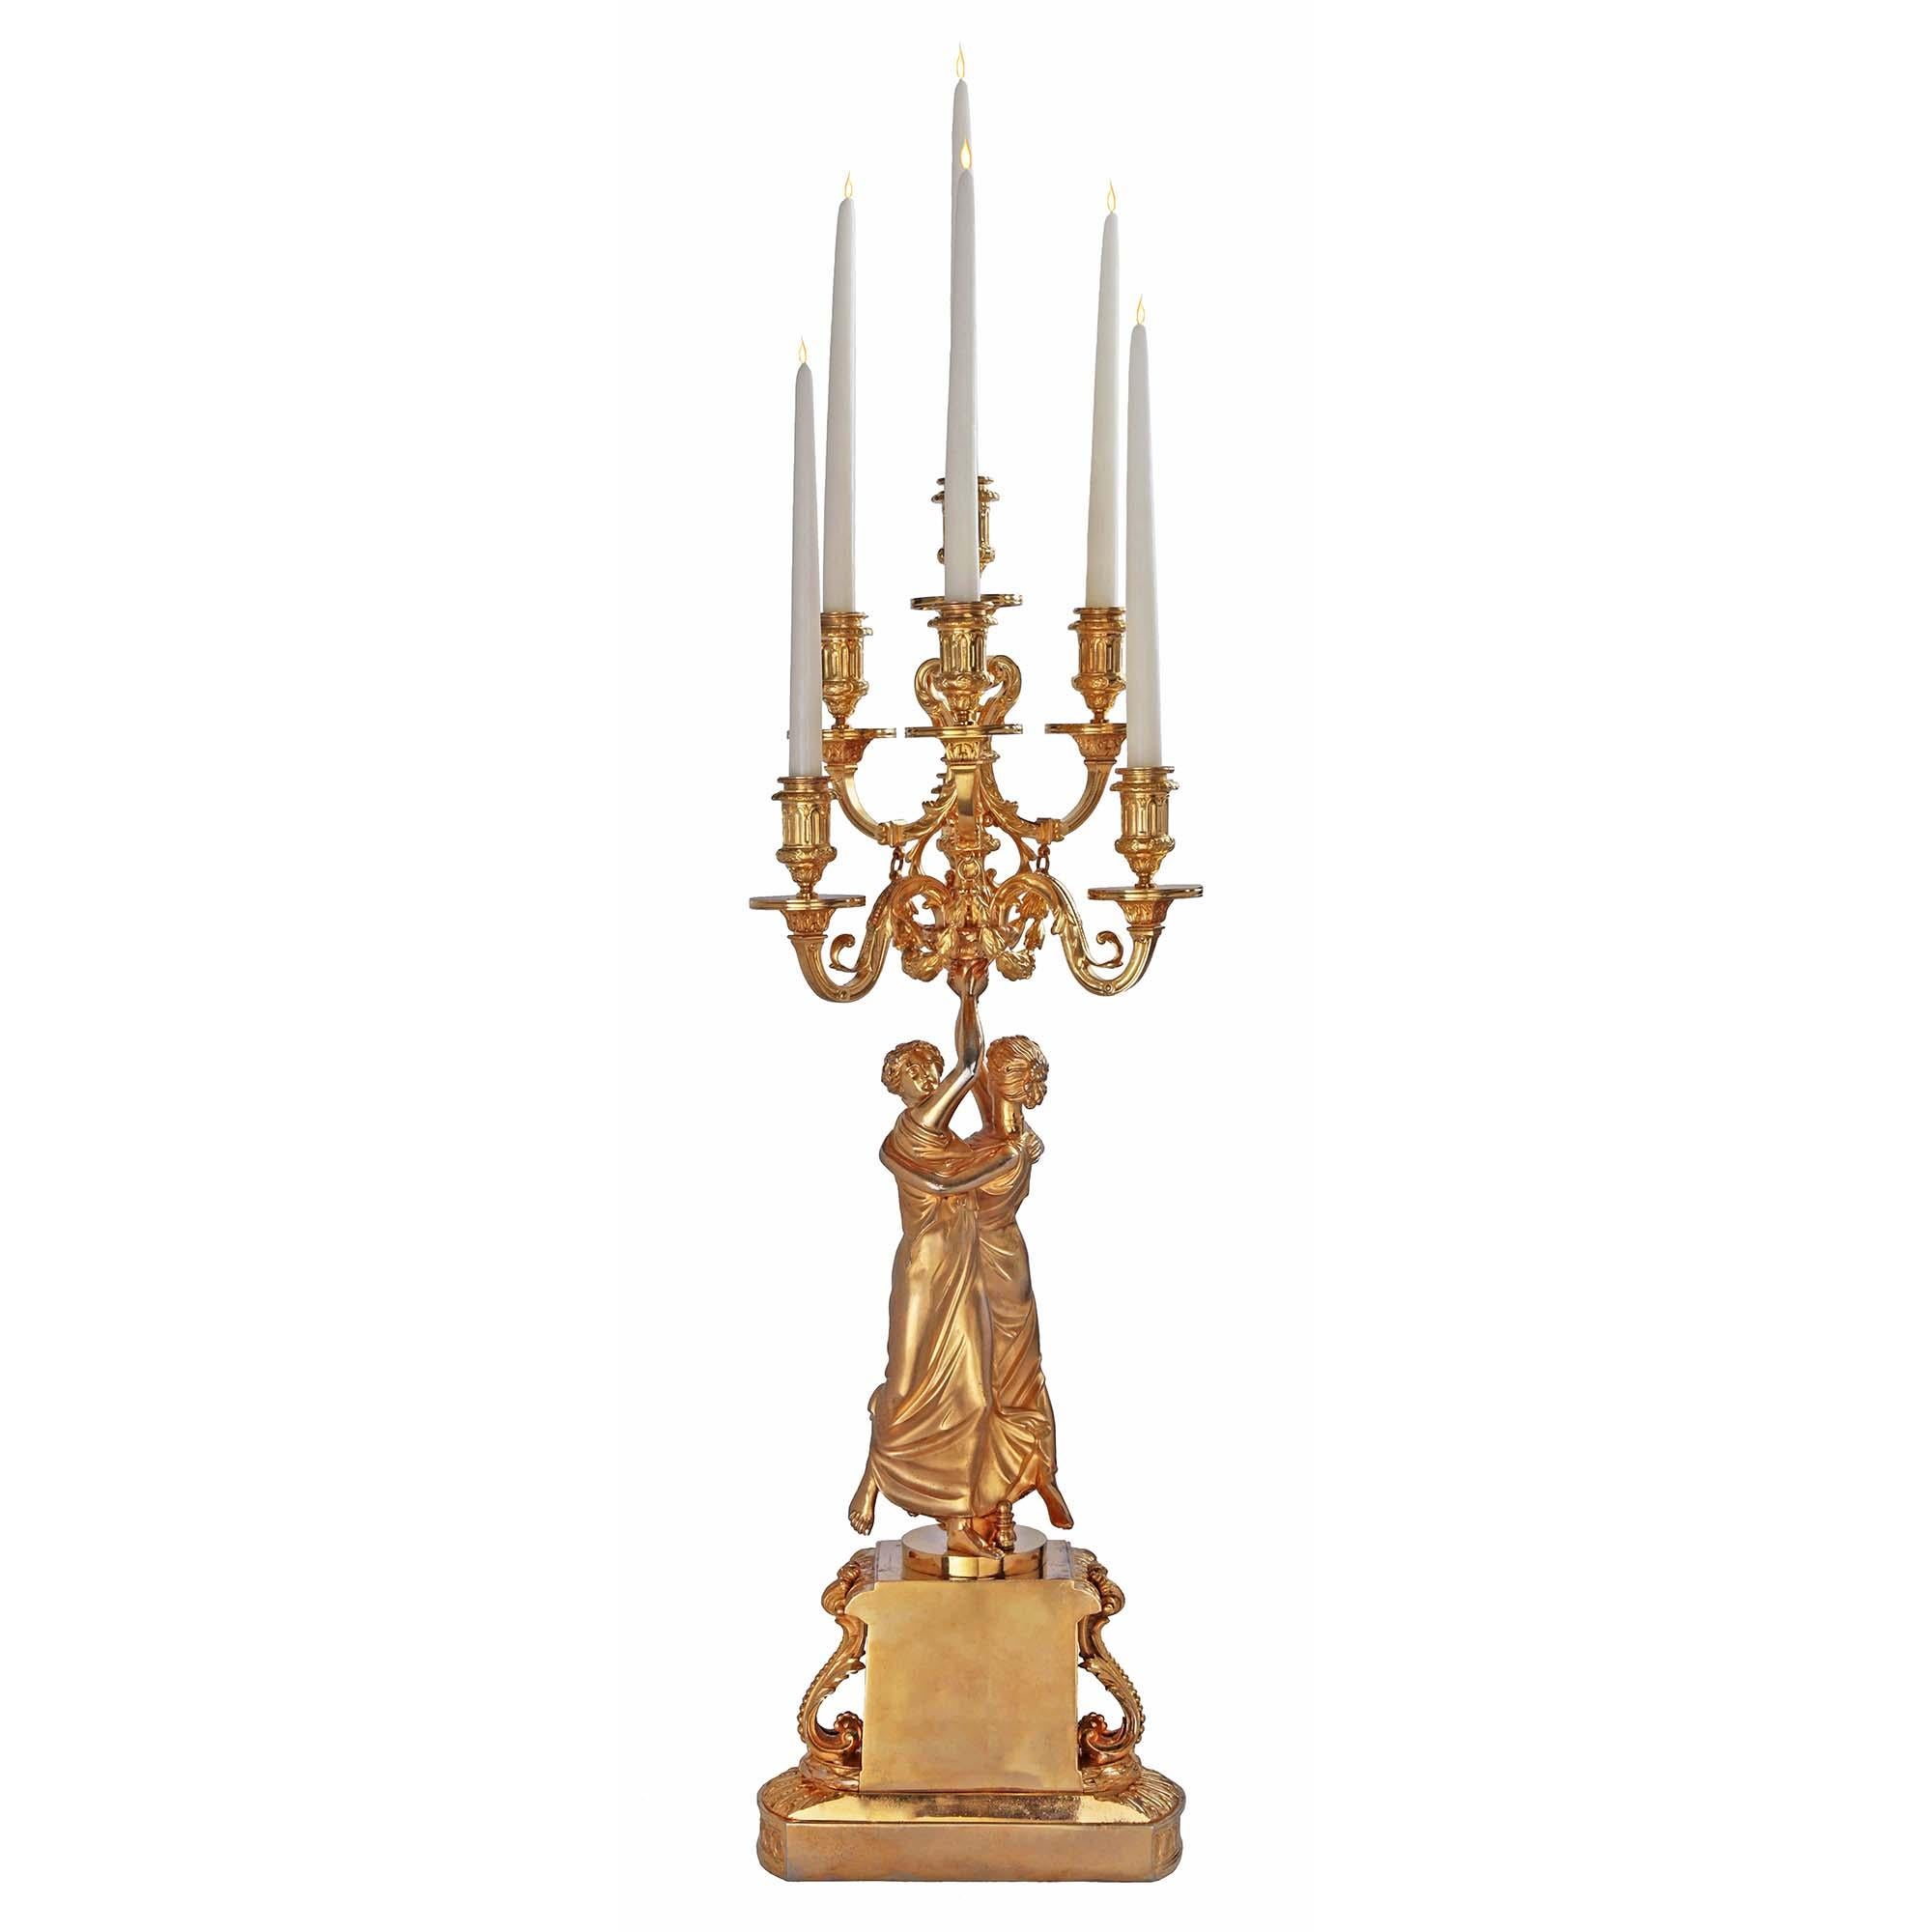 French 19th Century Louis XVI Style Belle Époque Period Candelabras In Good Condition For Sale In West Palm Beach, FL